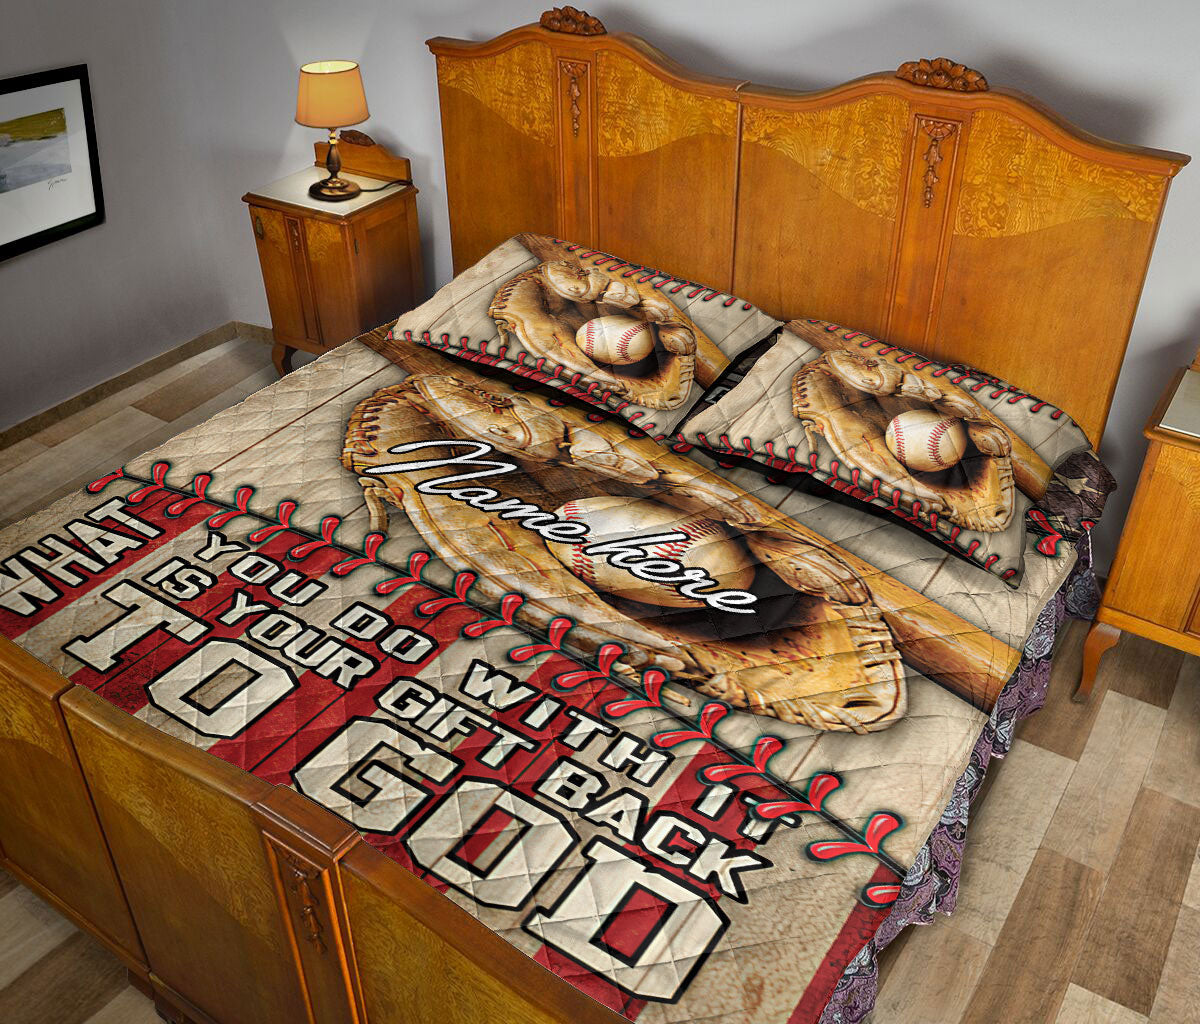 Ohaprints-Quilt-Bed-Set-Pillowcase-Your-Talent-Baseball-Lover-Gift-Ball-Glove-Vintage-Custom-Personalized-Name-Blanket-Bedspread-Bedding-2011-Queen (80'' x 90'')